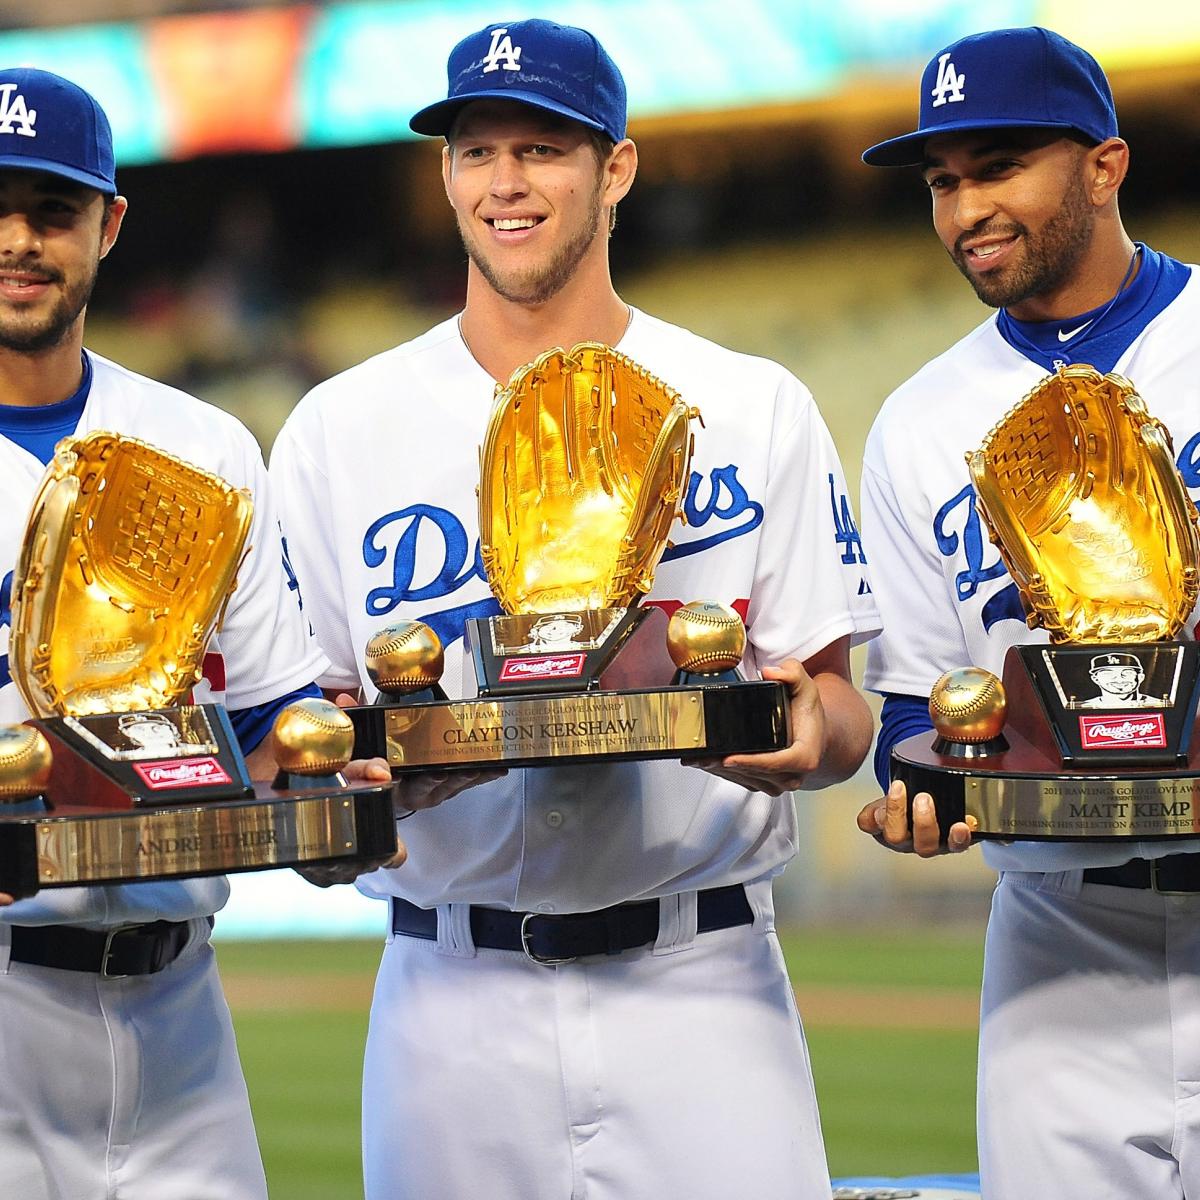 Gold Glove Award winners, as they're announced  - NBC Sports